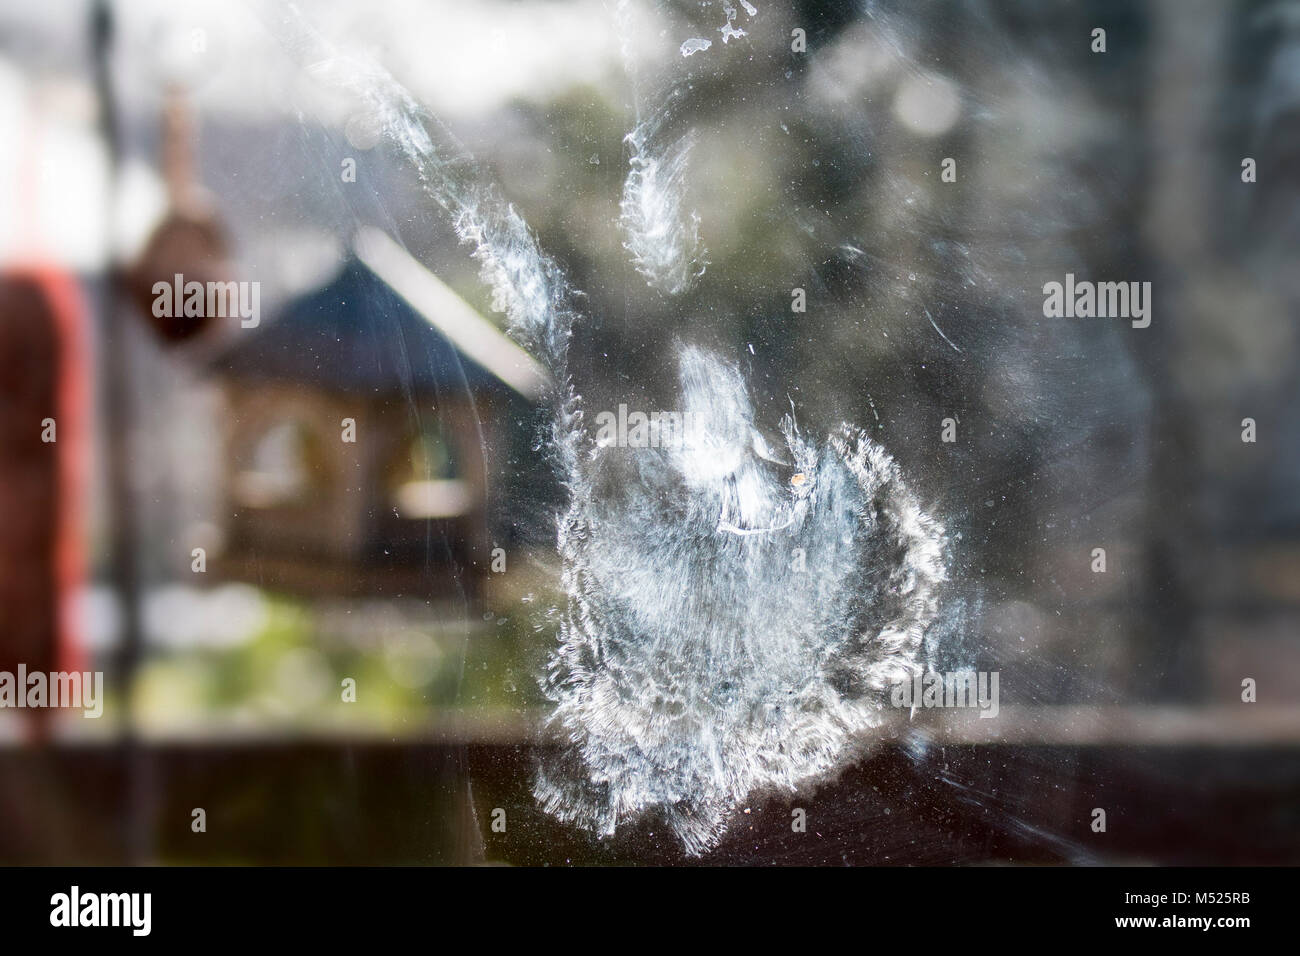 Pigeon imprint made of oily dust from powder down feathers after colliding with window glass pane of house Stock Photo